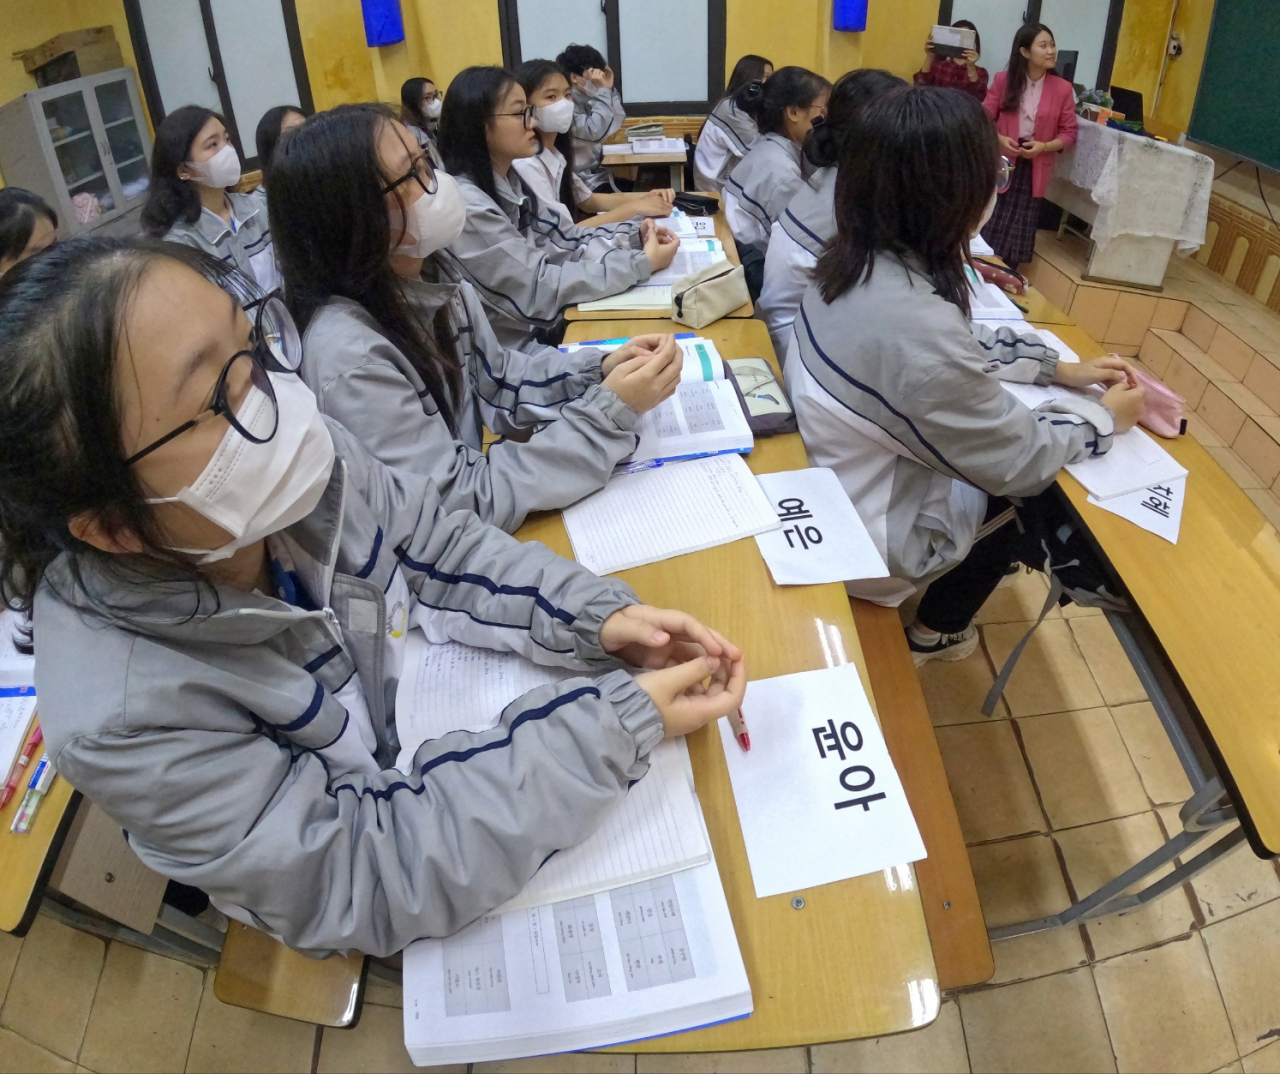 Students in grade 10 at Marie Curie High School listen to a lecture on the Korean language on Feb. 9, 2023. (Choi Jae-hee / The Korea Herald)